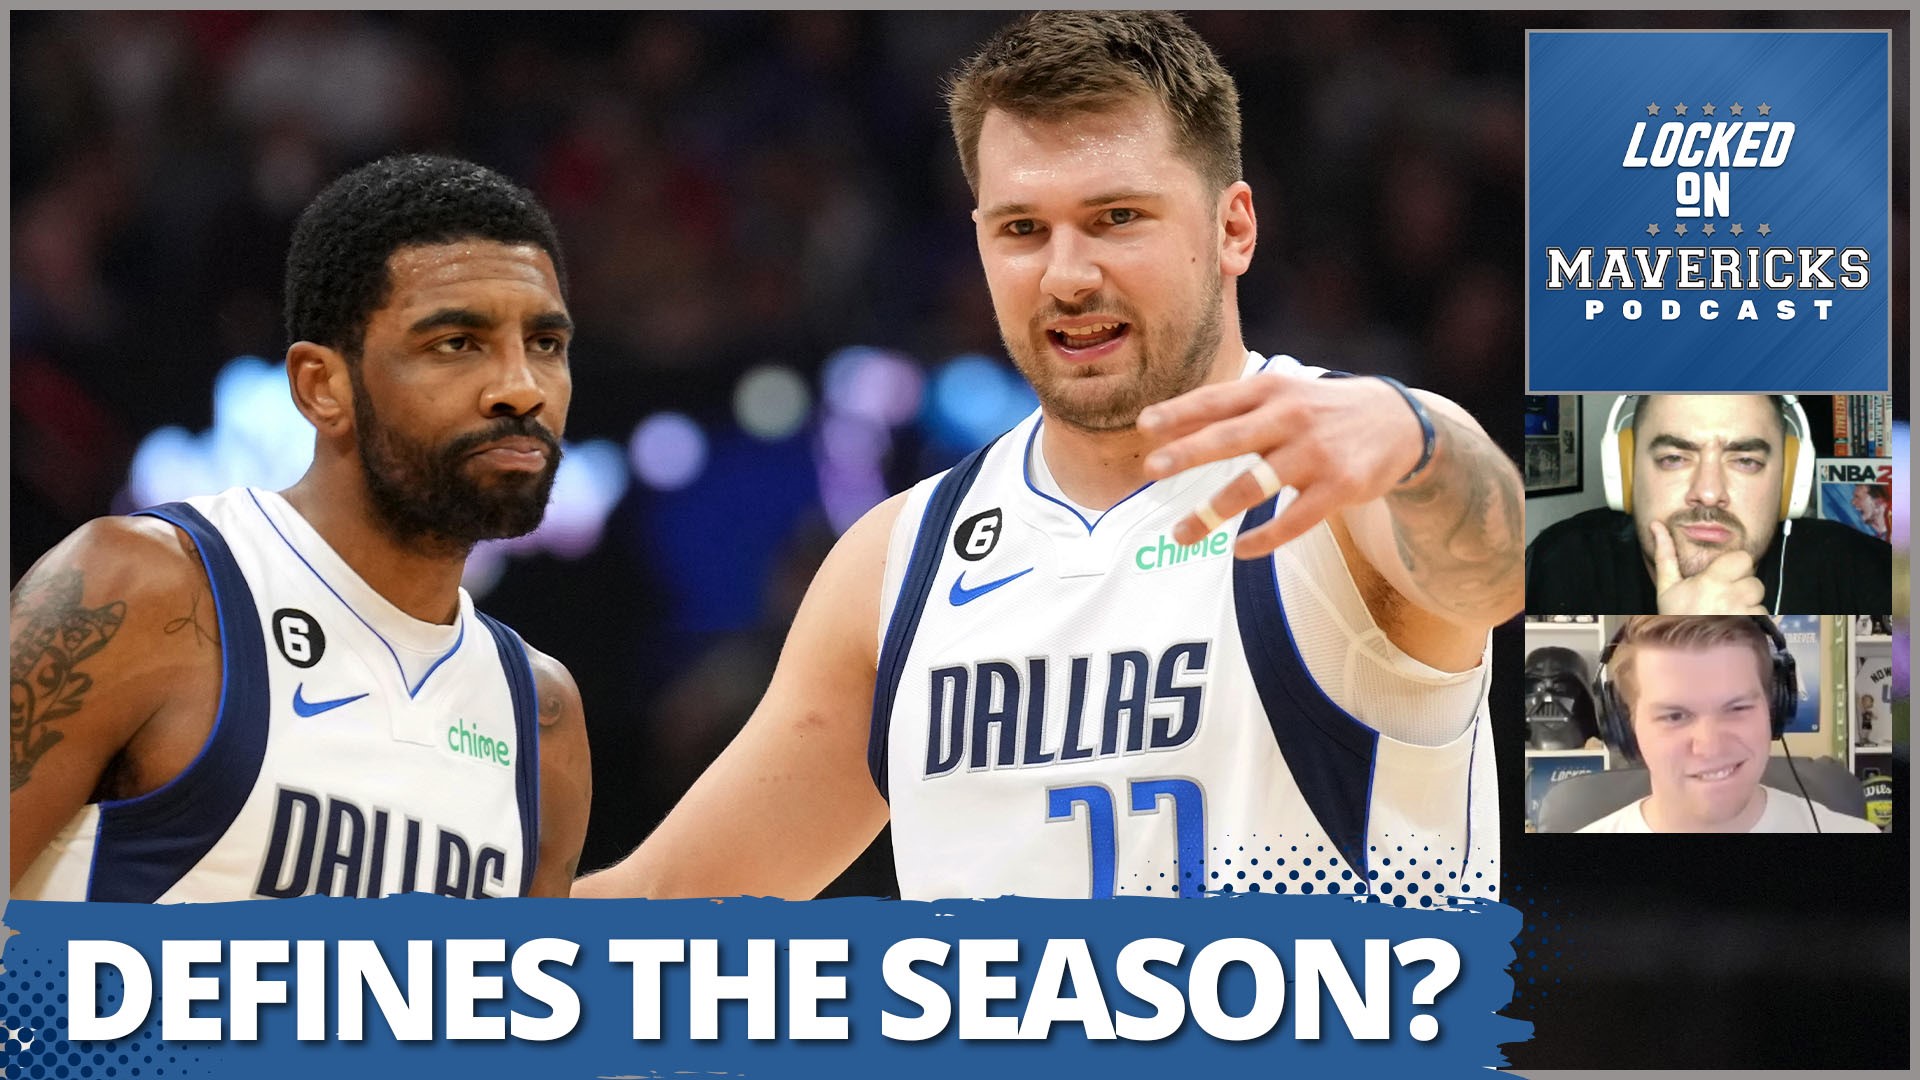 Nick Angstadt & Isaac Harris share 3 Mavs stats that have defined the Dallas Mavericks season so far. What has the Mavs defense failed to do this year? What is the o